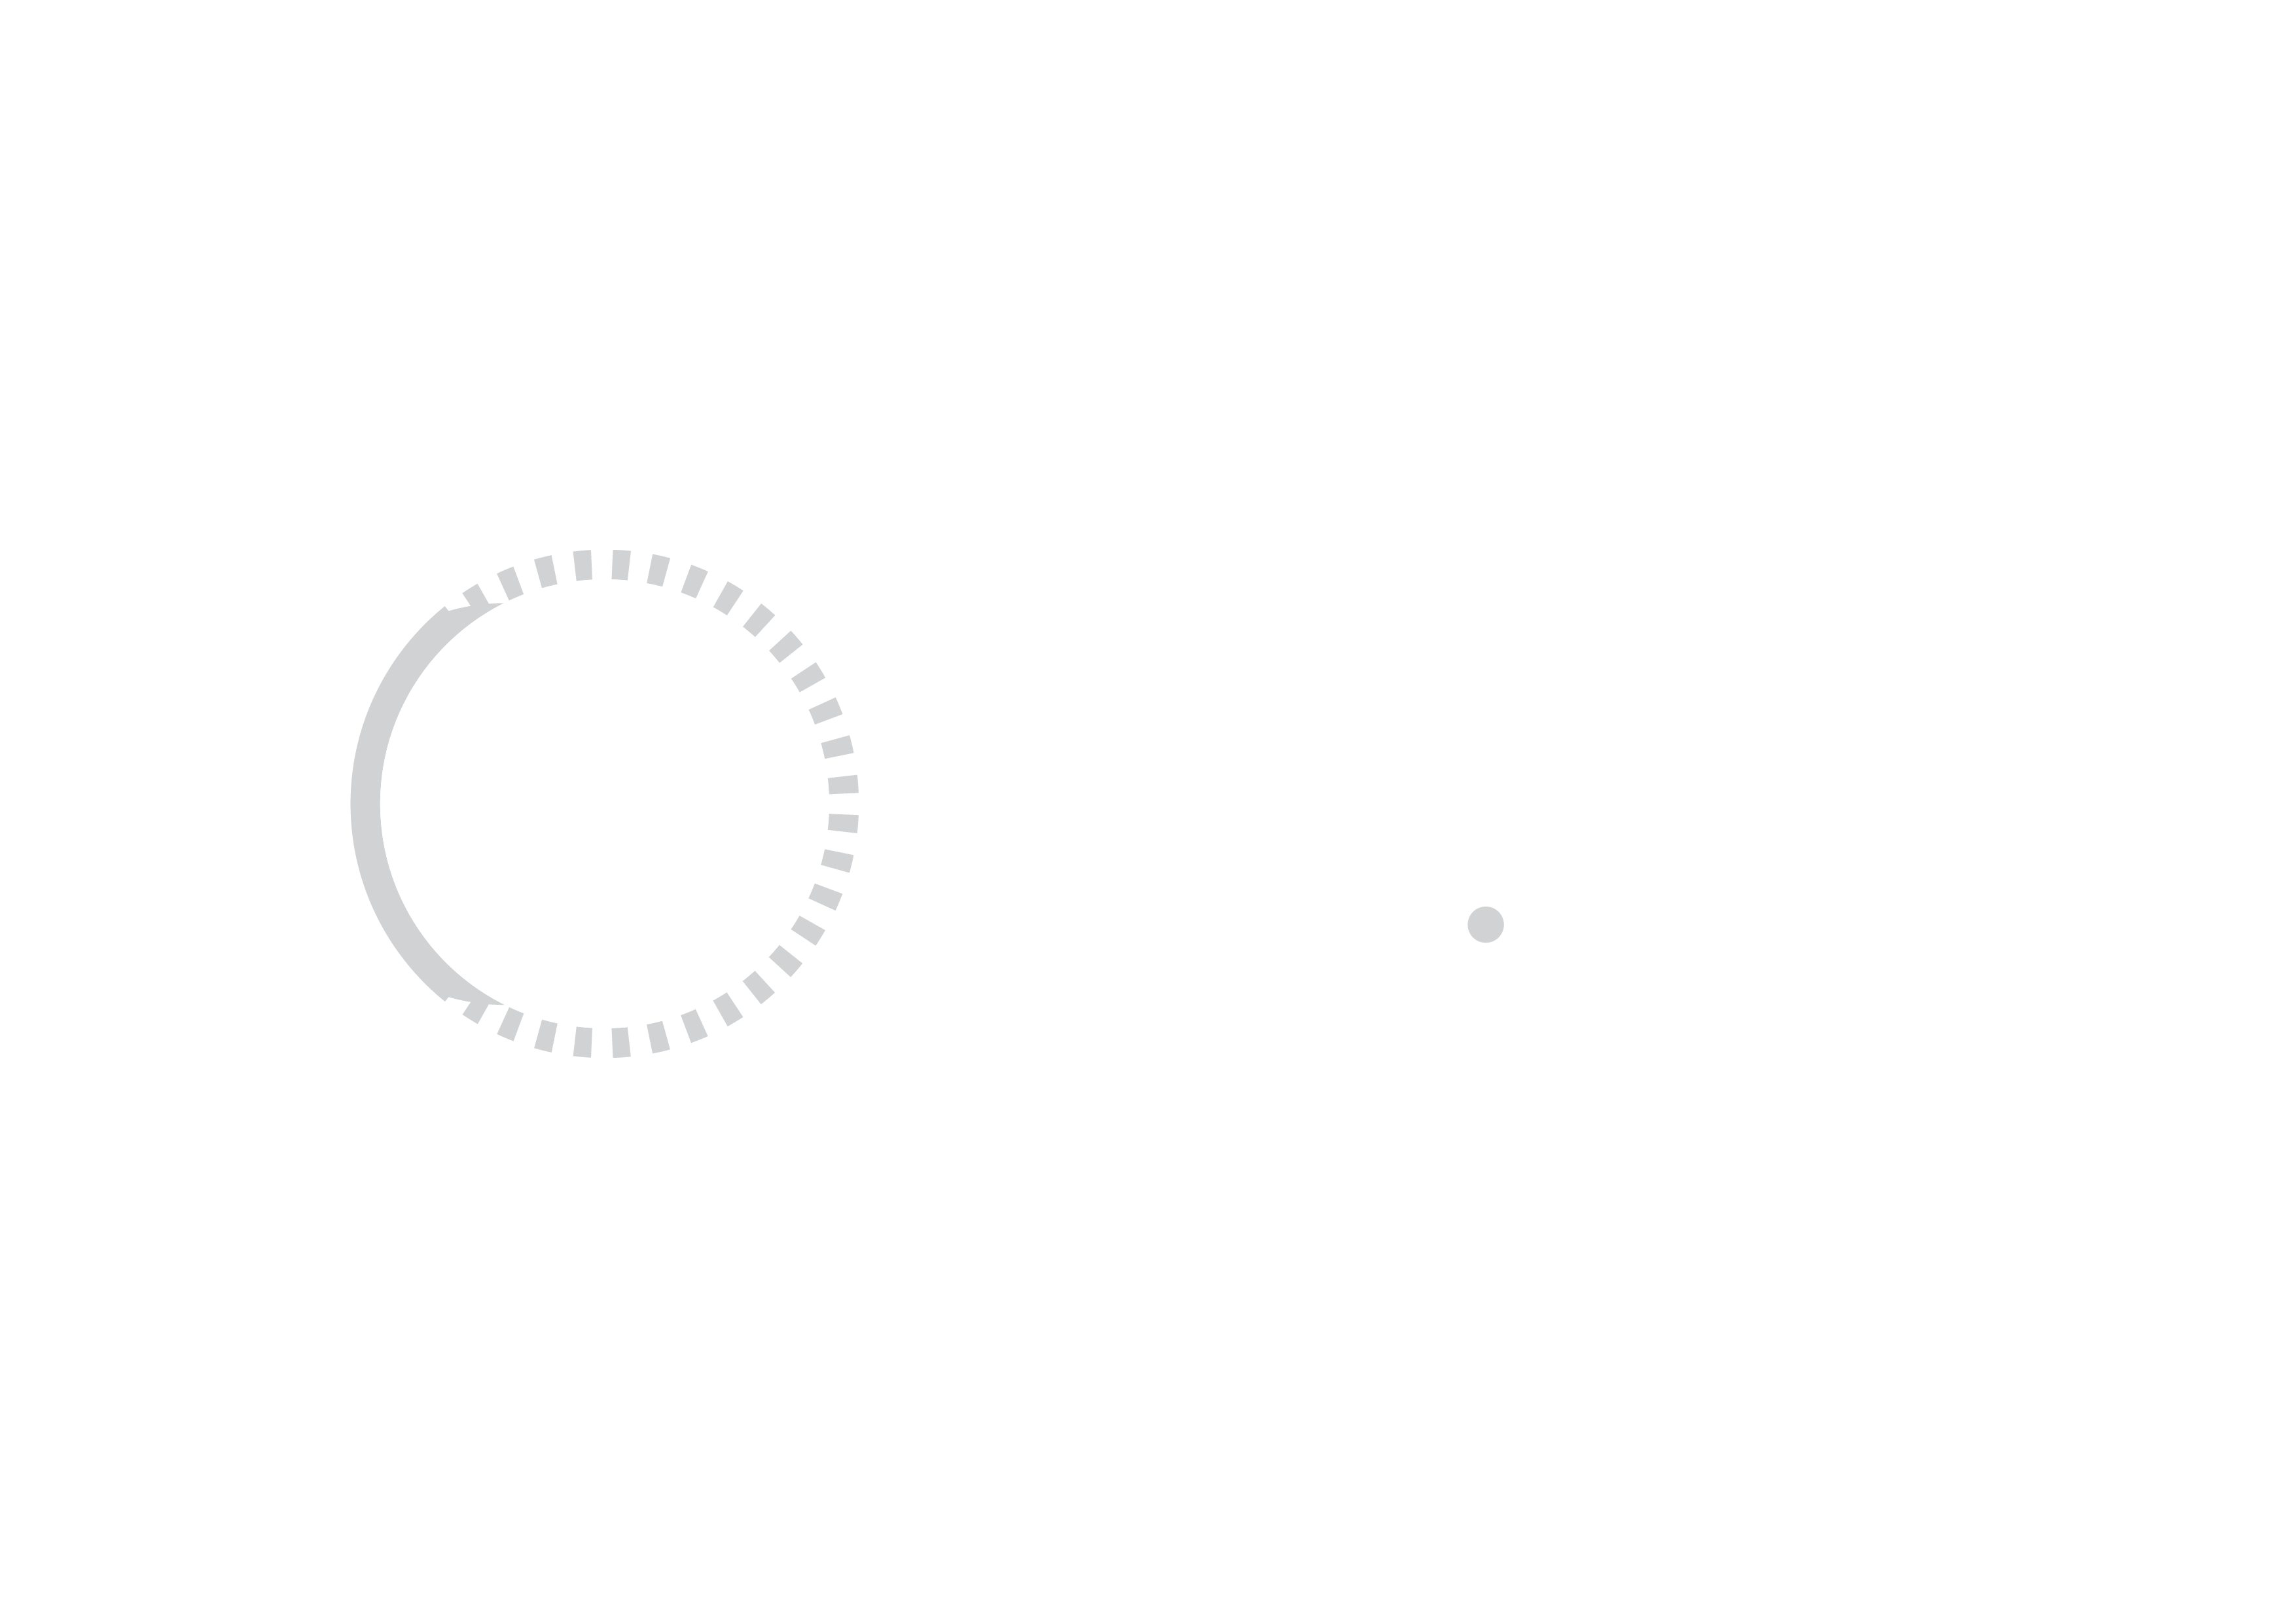 Tire Industry Project